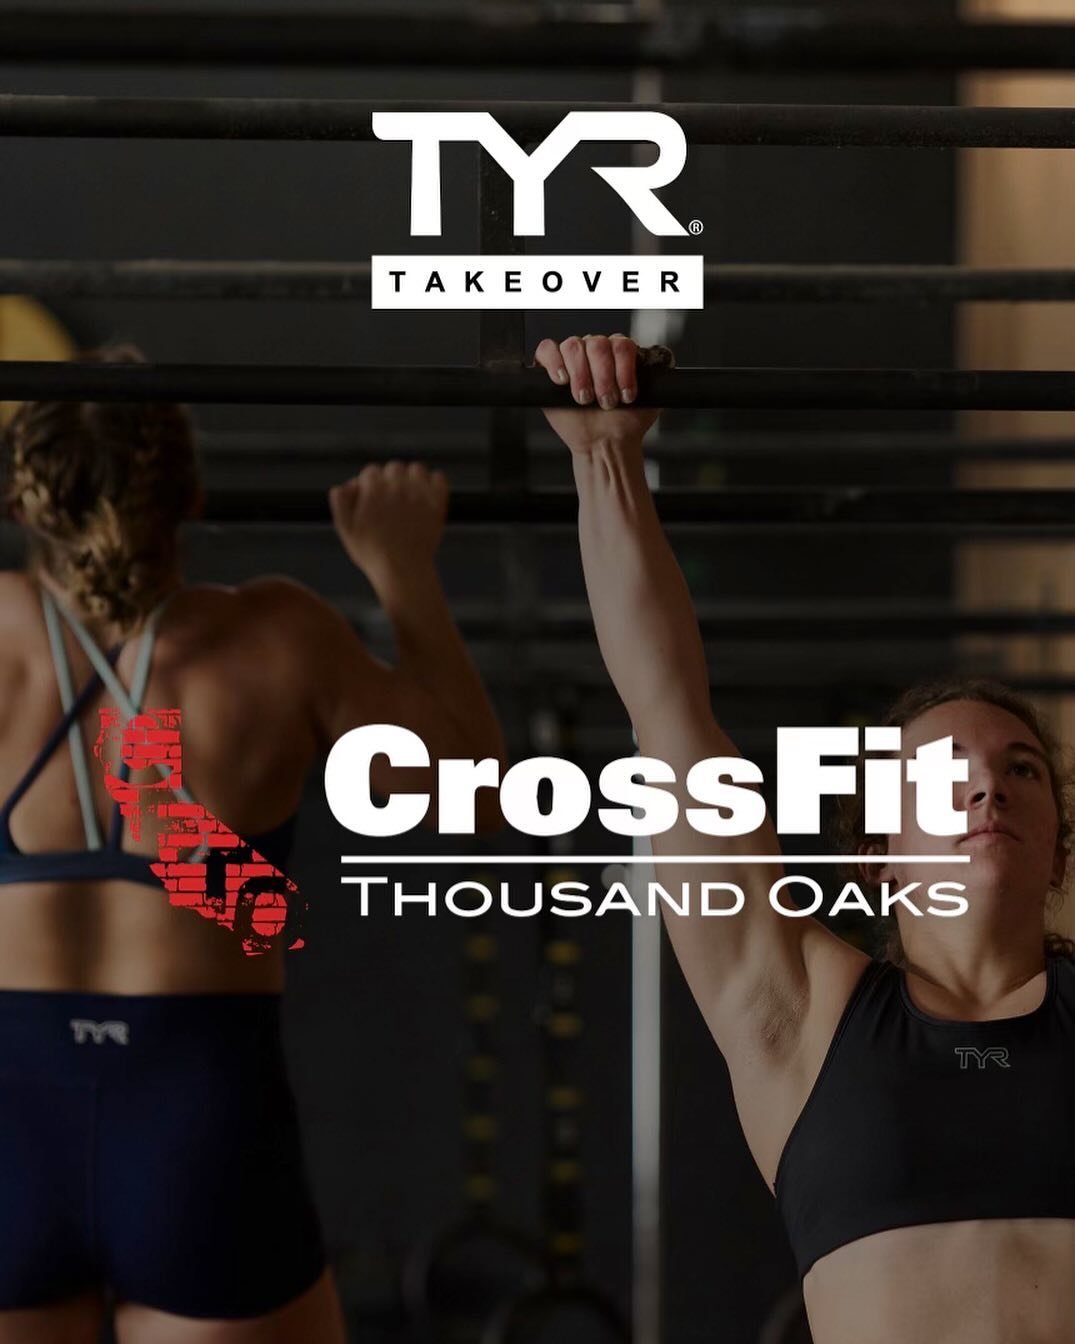 On Monday, May 13, CrossFit Thousand
Oaks members get 20% off on all purchases including training shoes, lifters, sunglasses, and apparel plus exclusive deals and promos.